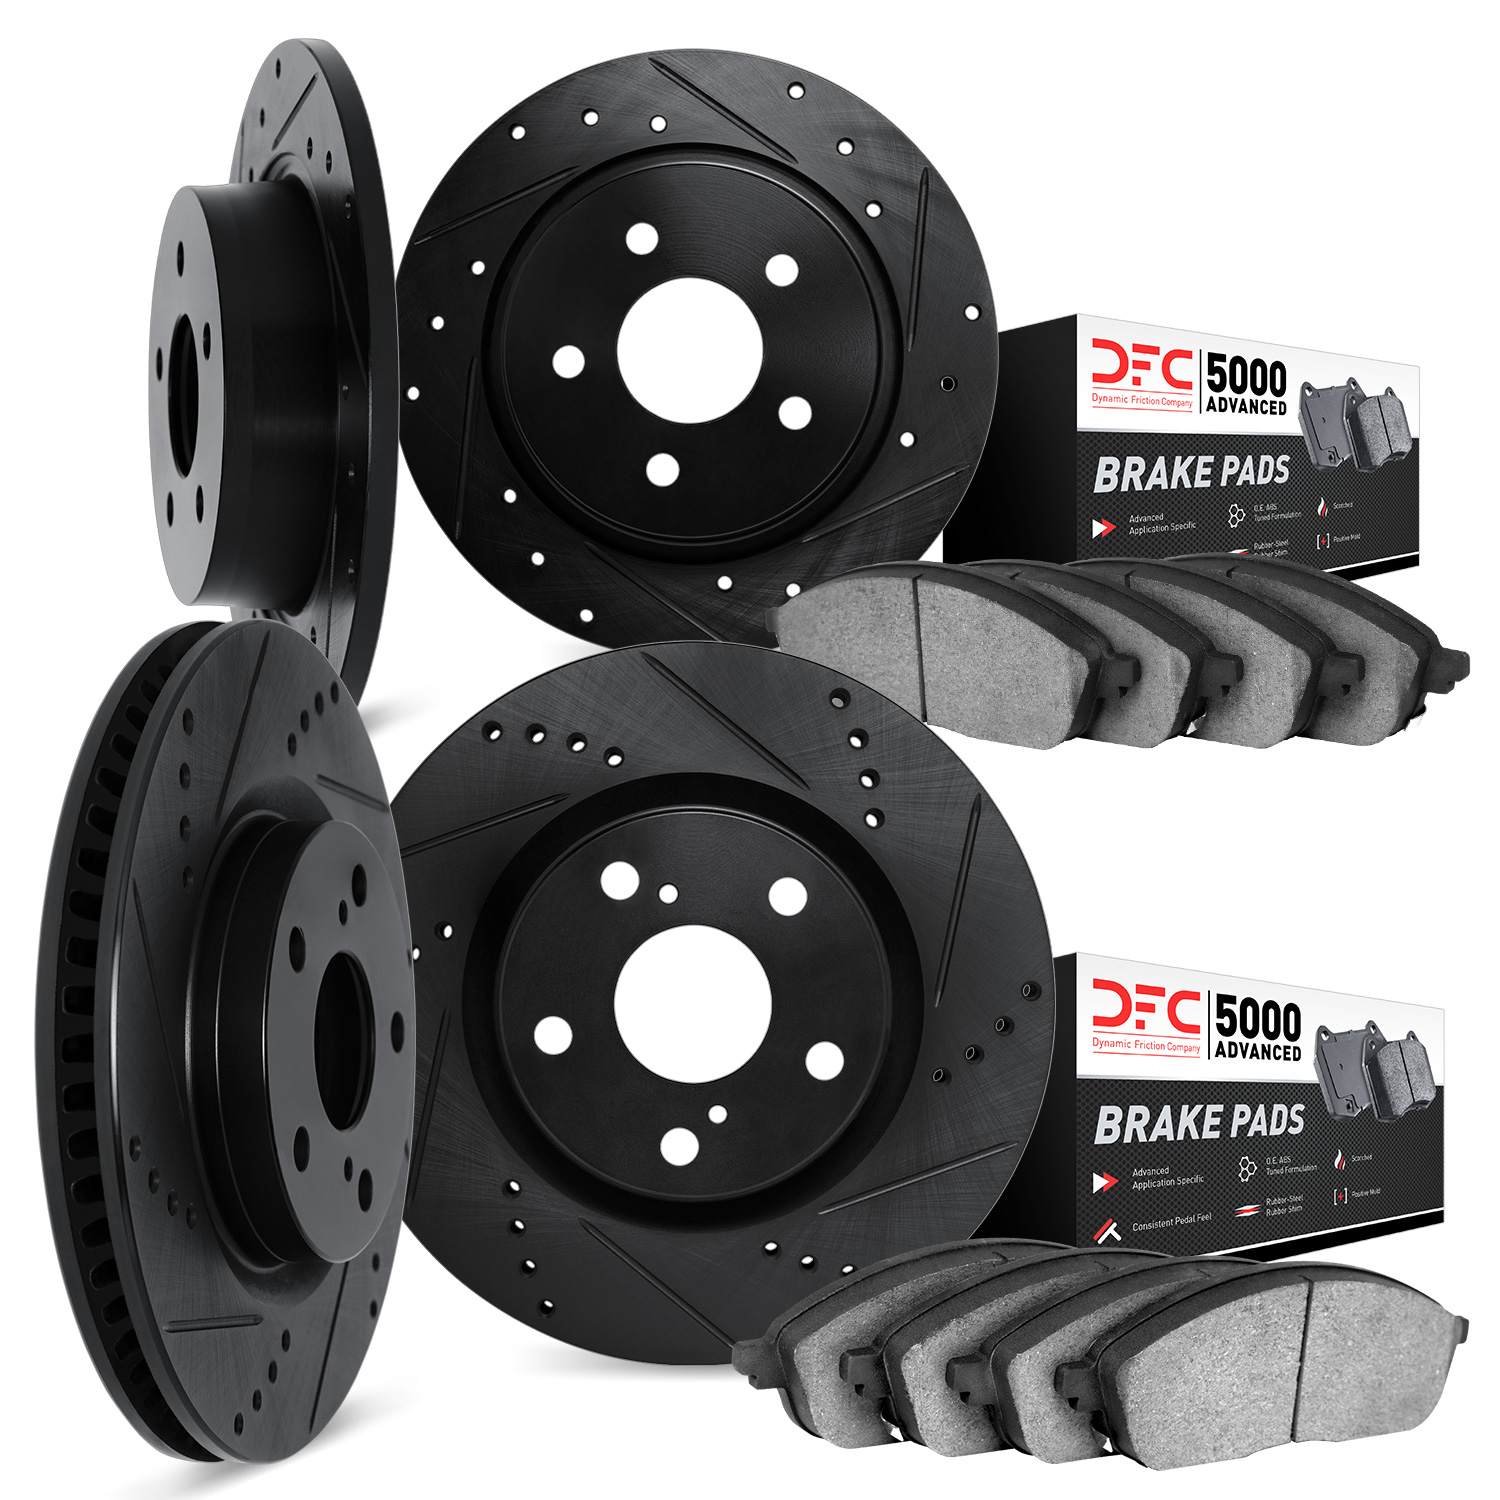 8504-74060 Drilled/Slotted Brake Rotors w/5000 Advanced Brake Pads Kit [Black], 1999-2010 Audi/Volkswagen, Position: Front and R